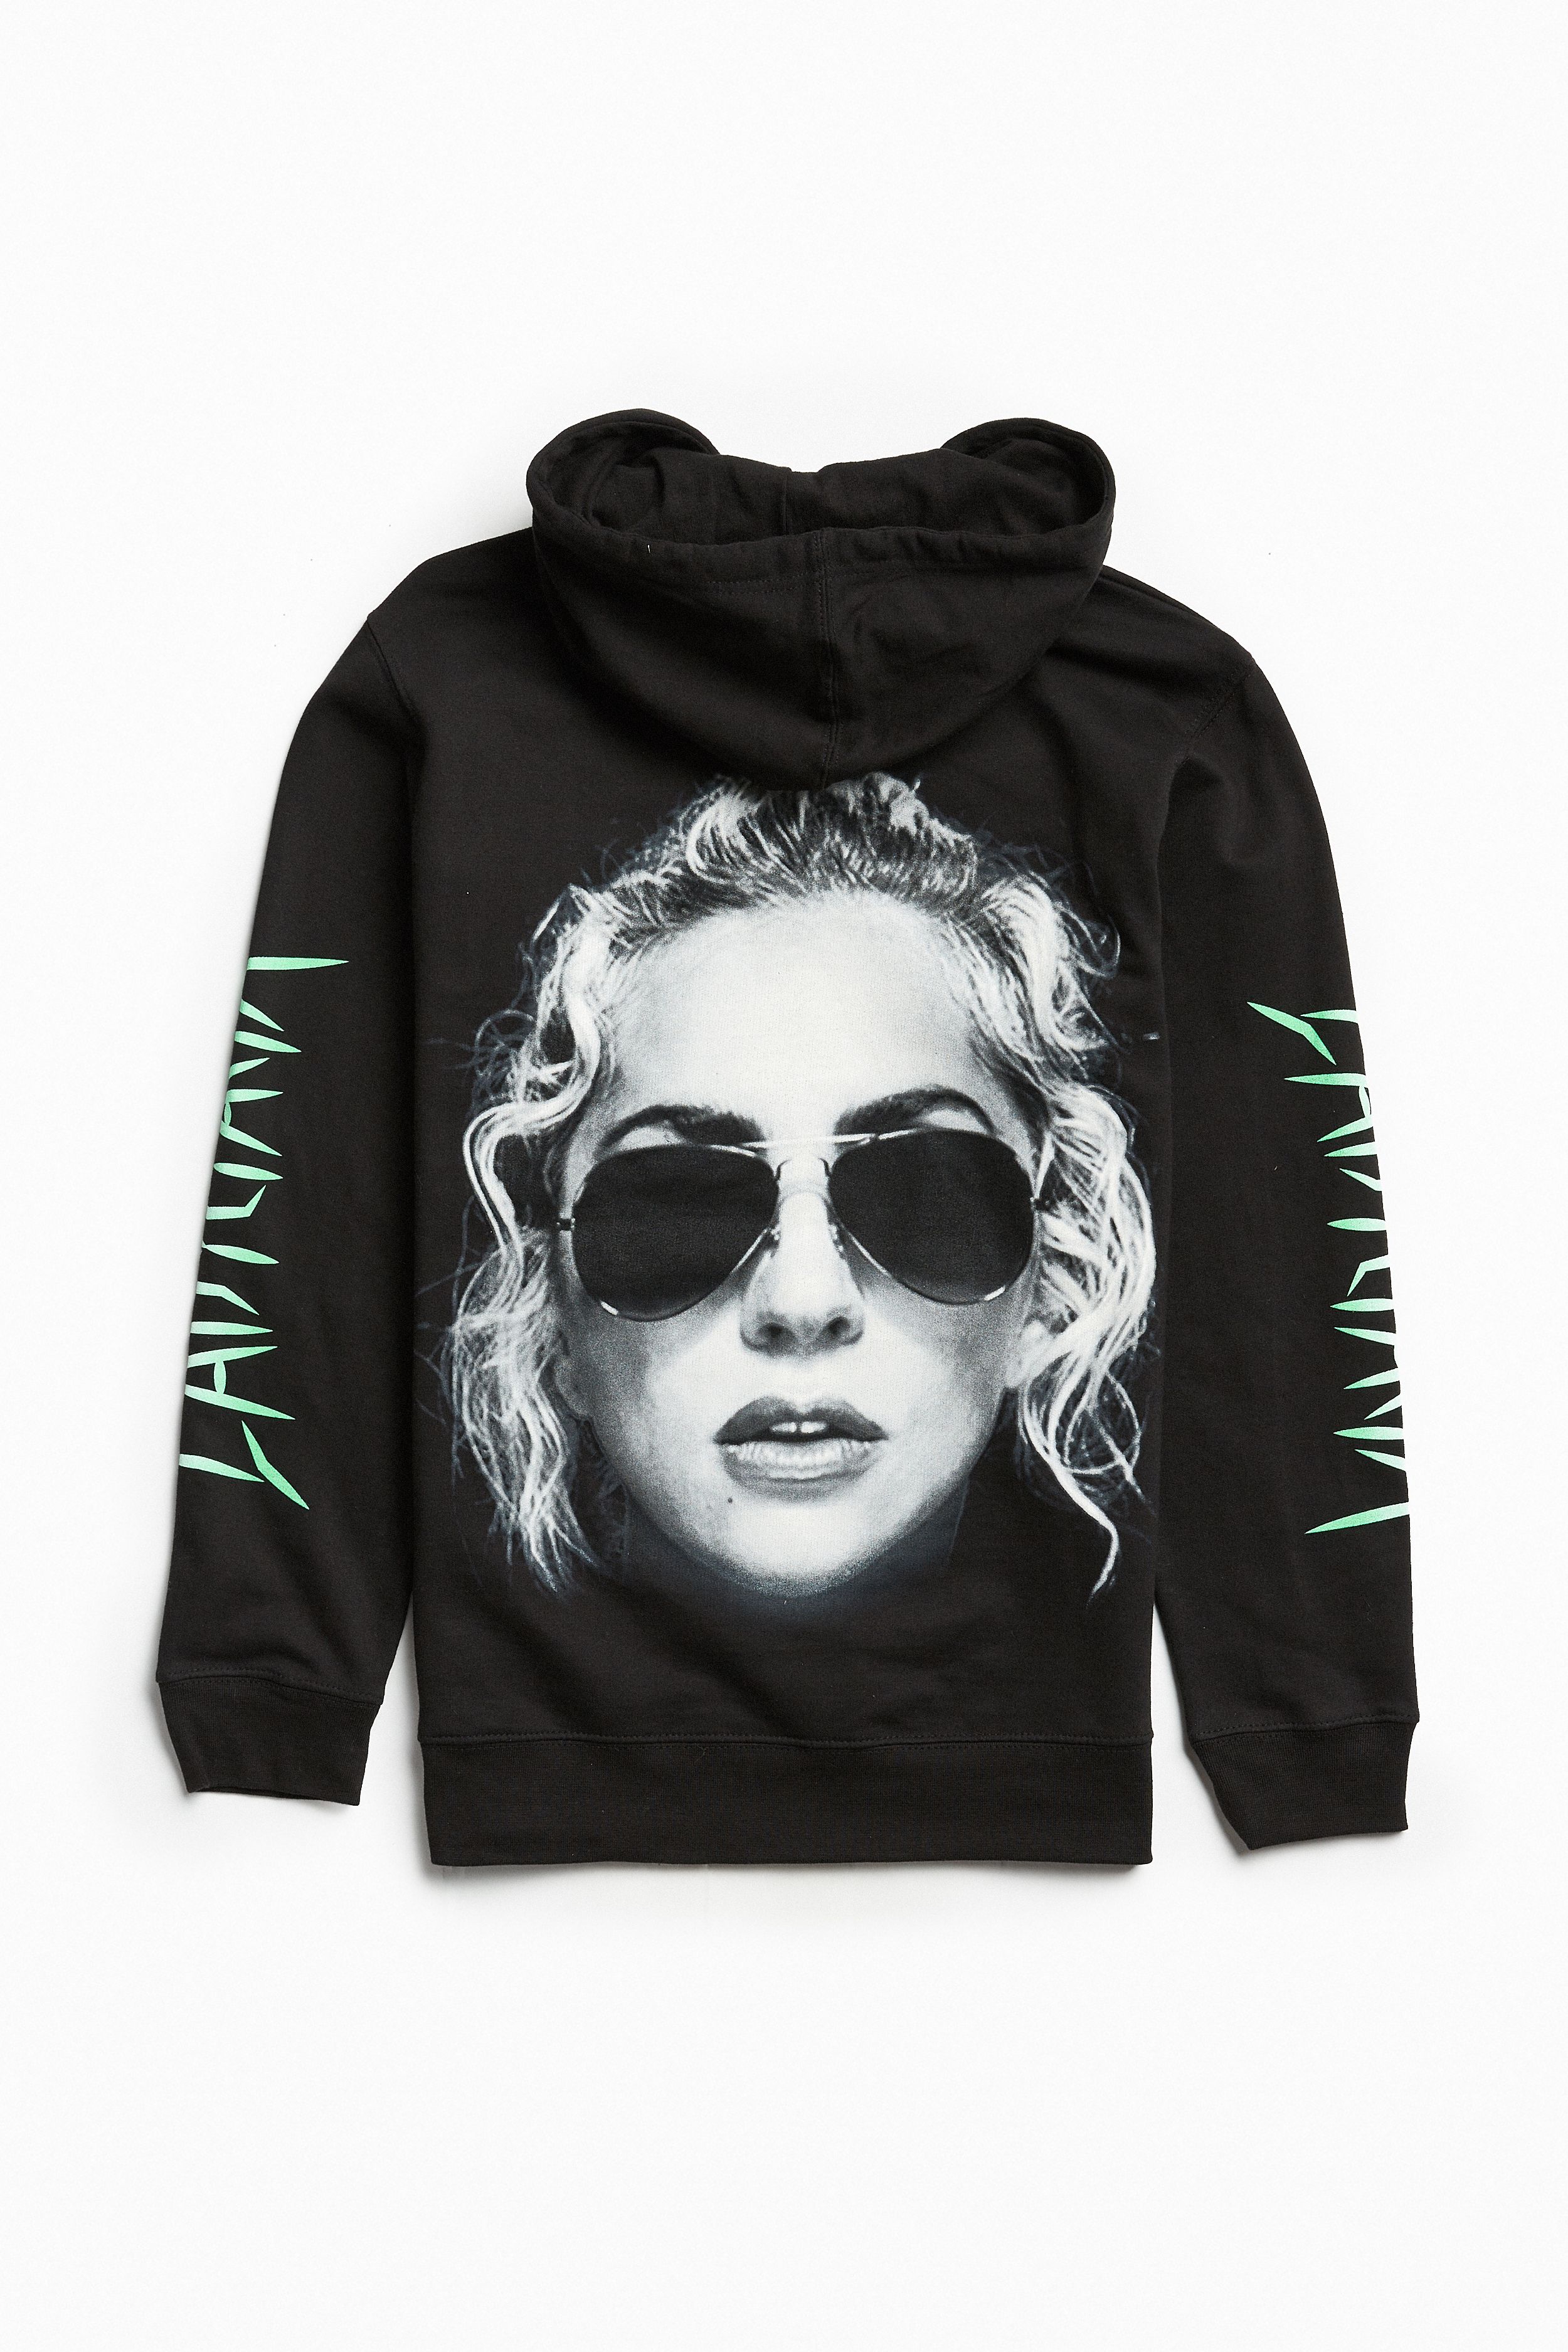 Lady Gaga Urban Outfitters Clothing Line - Joanne Tour Merchandise